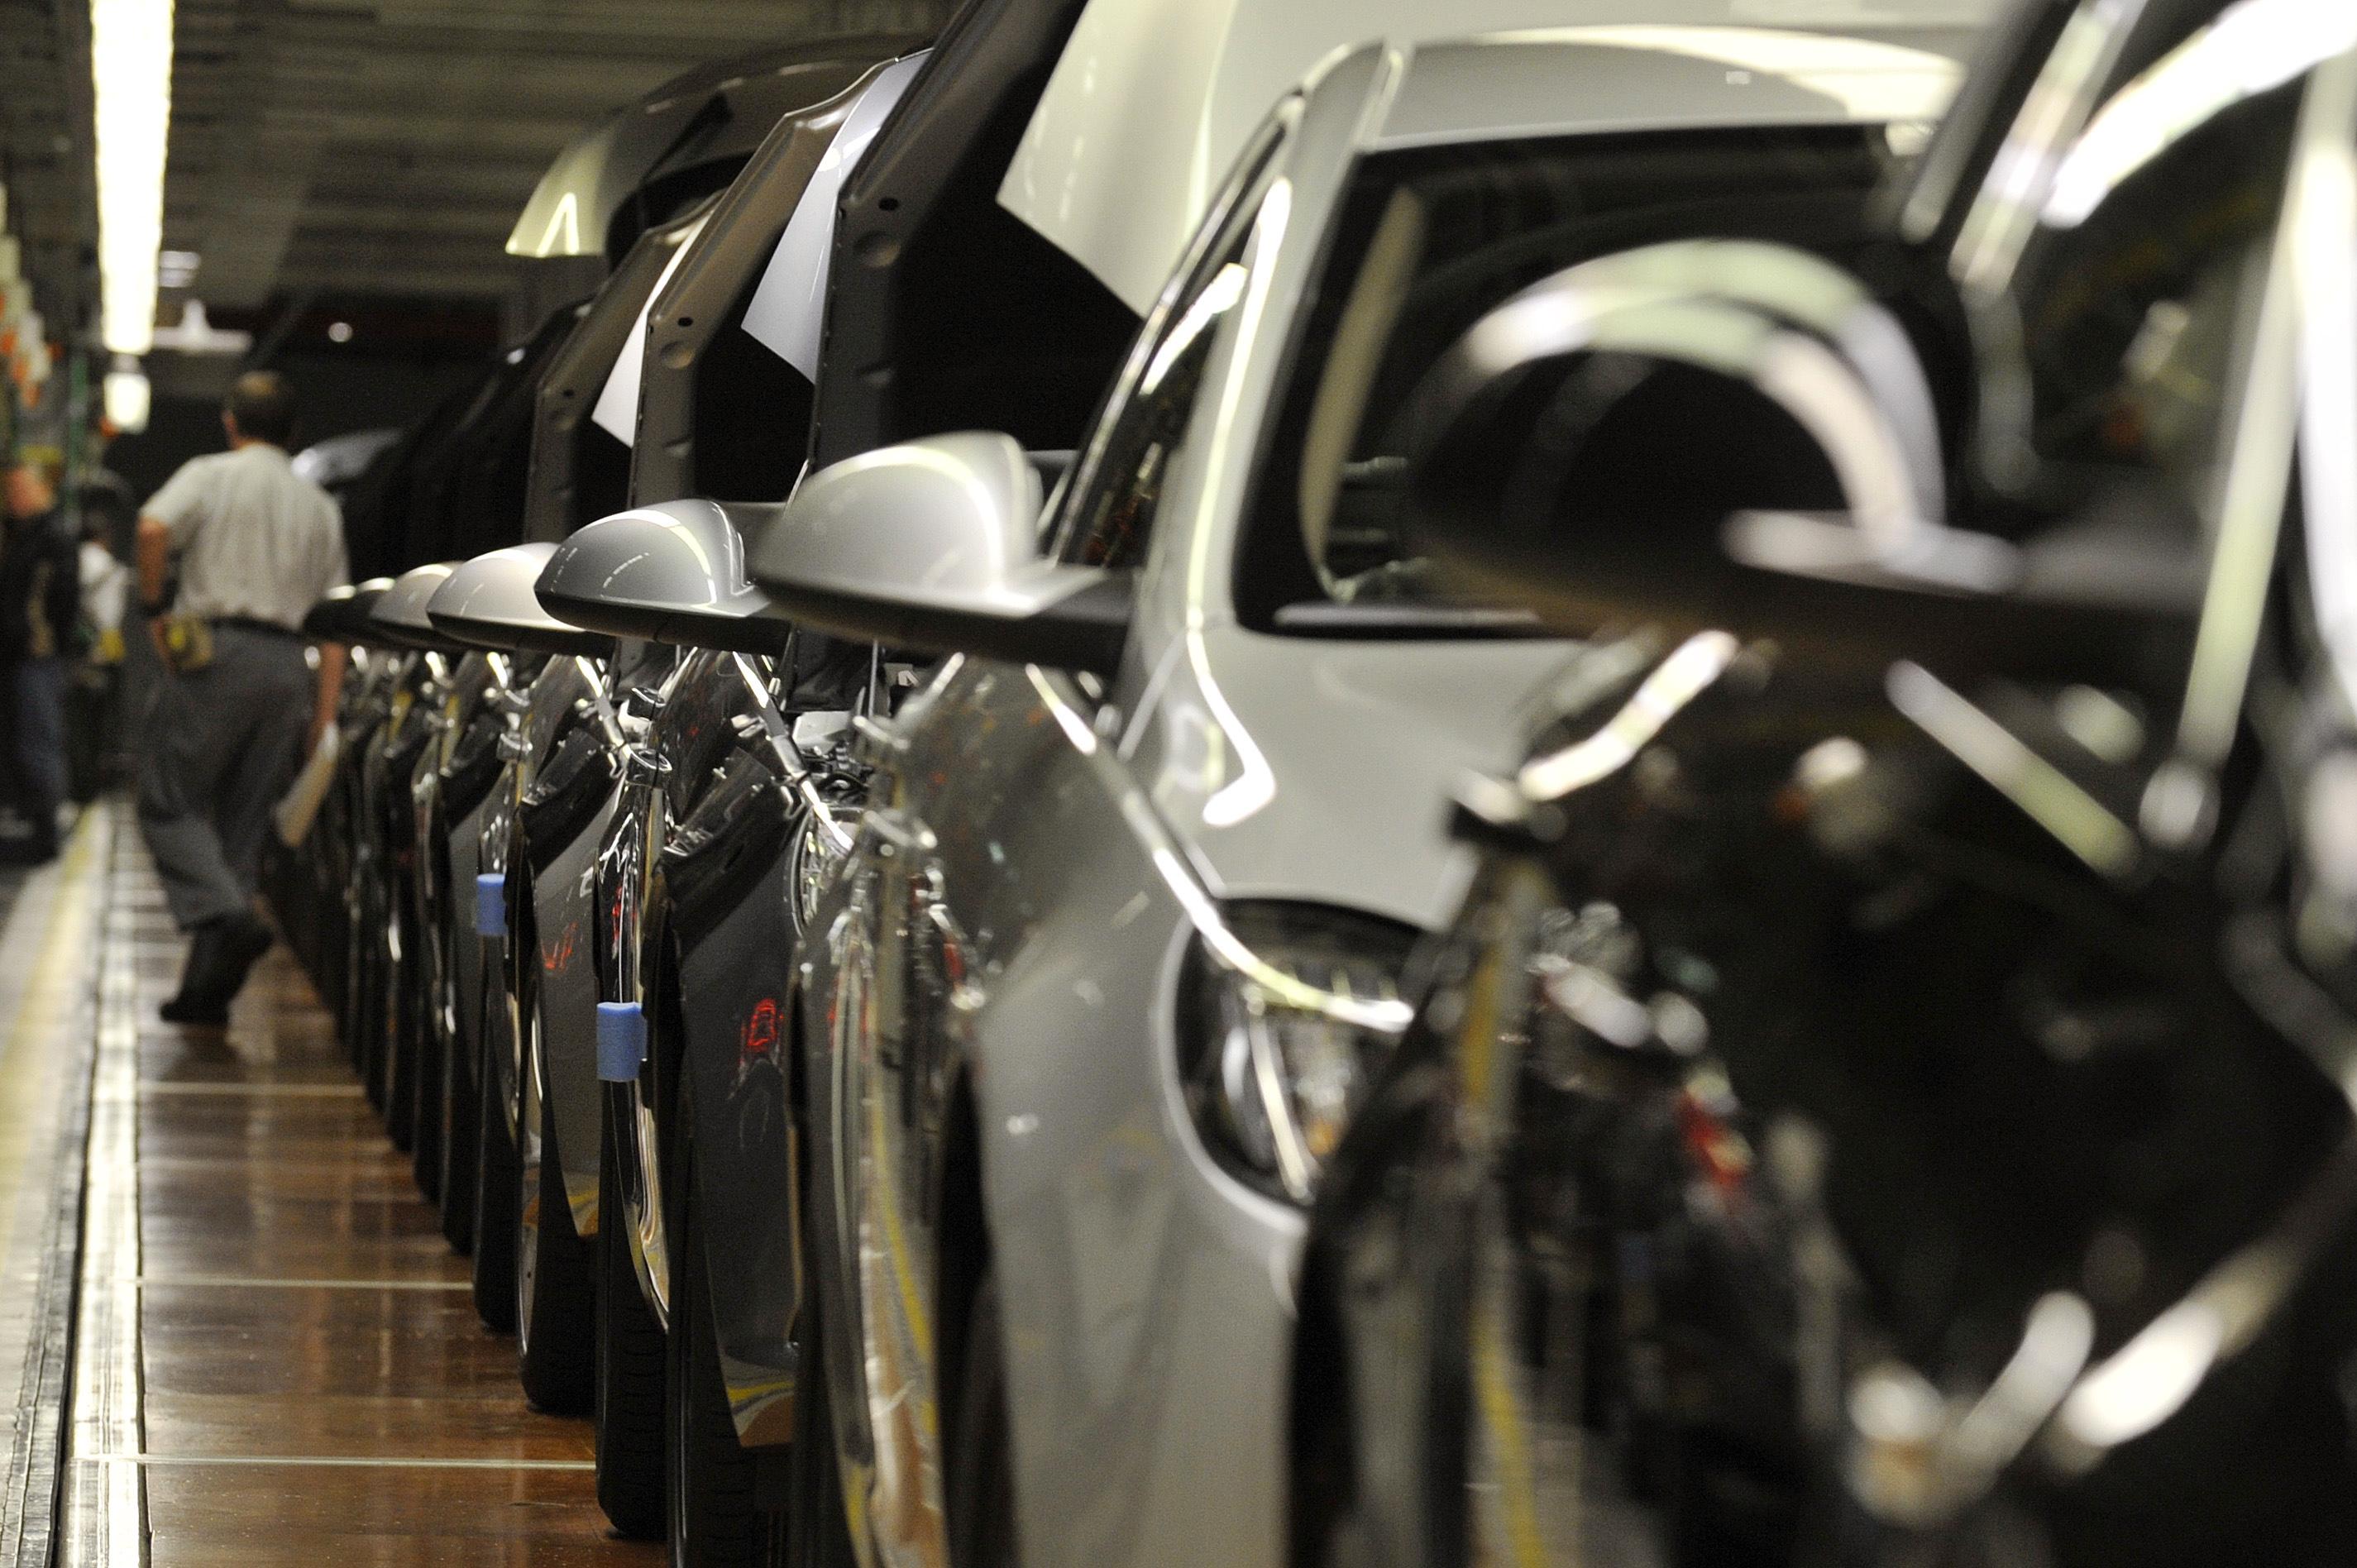 Newly built "Insignia" cars of General Motors German unit Opel are lined up inside the assembly hangar at the Opel headquarters in Ruesselsheim, December 3, 2008. REUTERS/Kai Pfaffenbach(GERMANY)